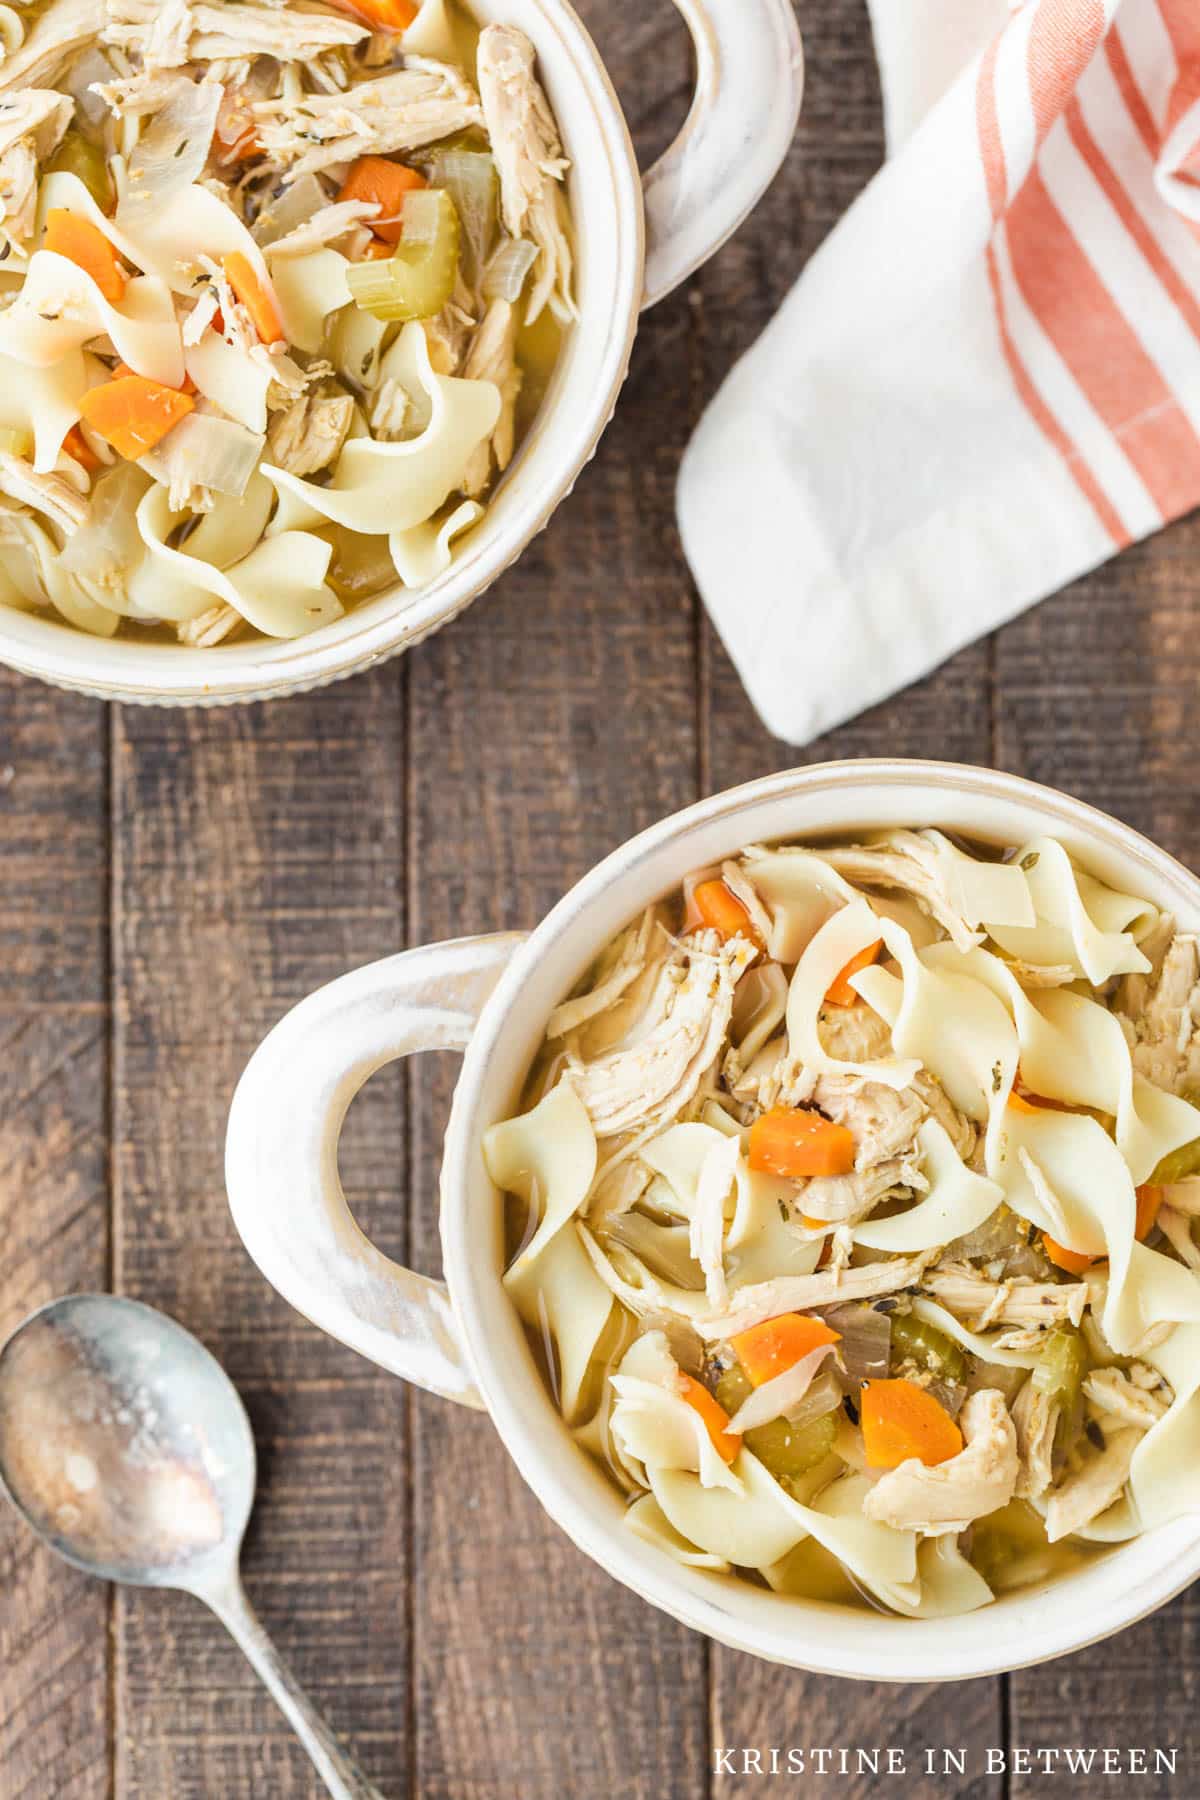 Two bowls of chicken noodle soup with antique spoons and an orange striped napkin in the background.